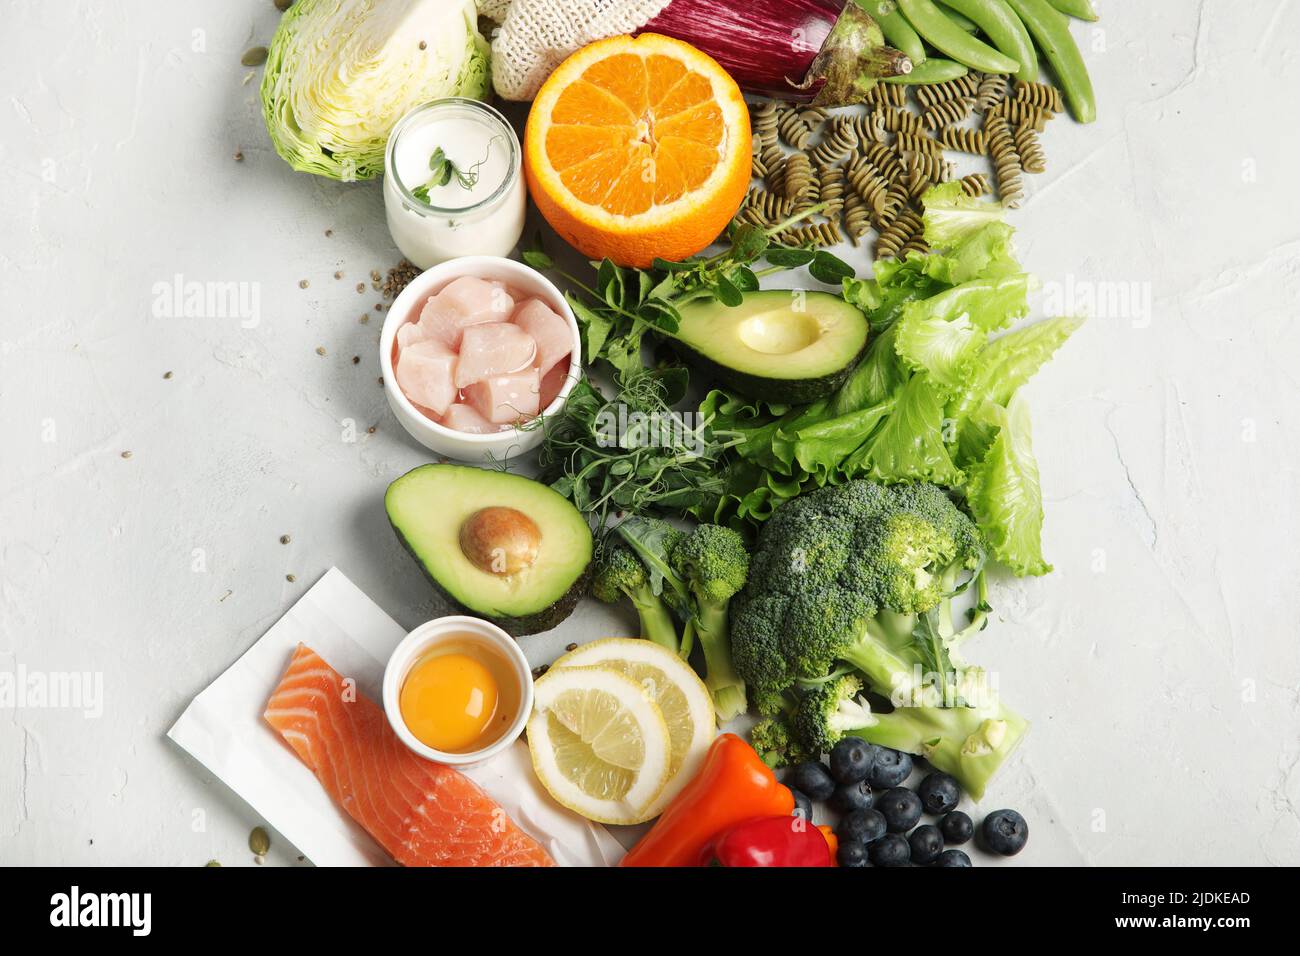 Dash flexitarian mediterranean diet on light background. Healthy food concept. Flat lay, top view, copy space Stock Photo